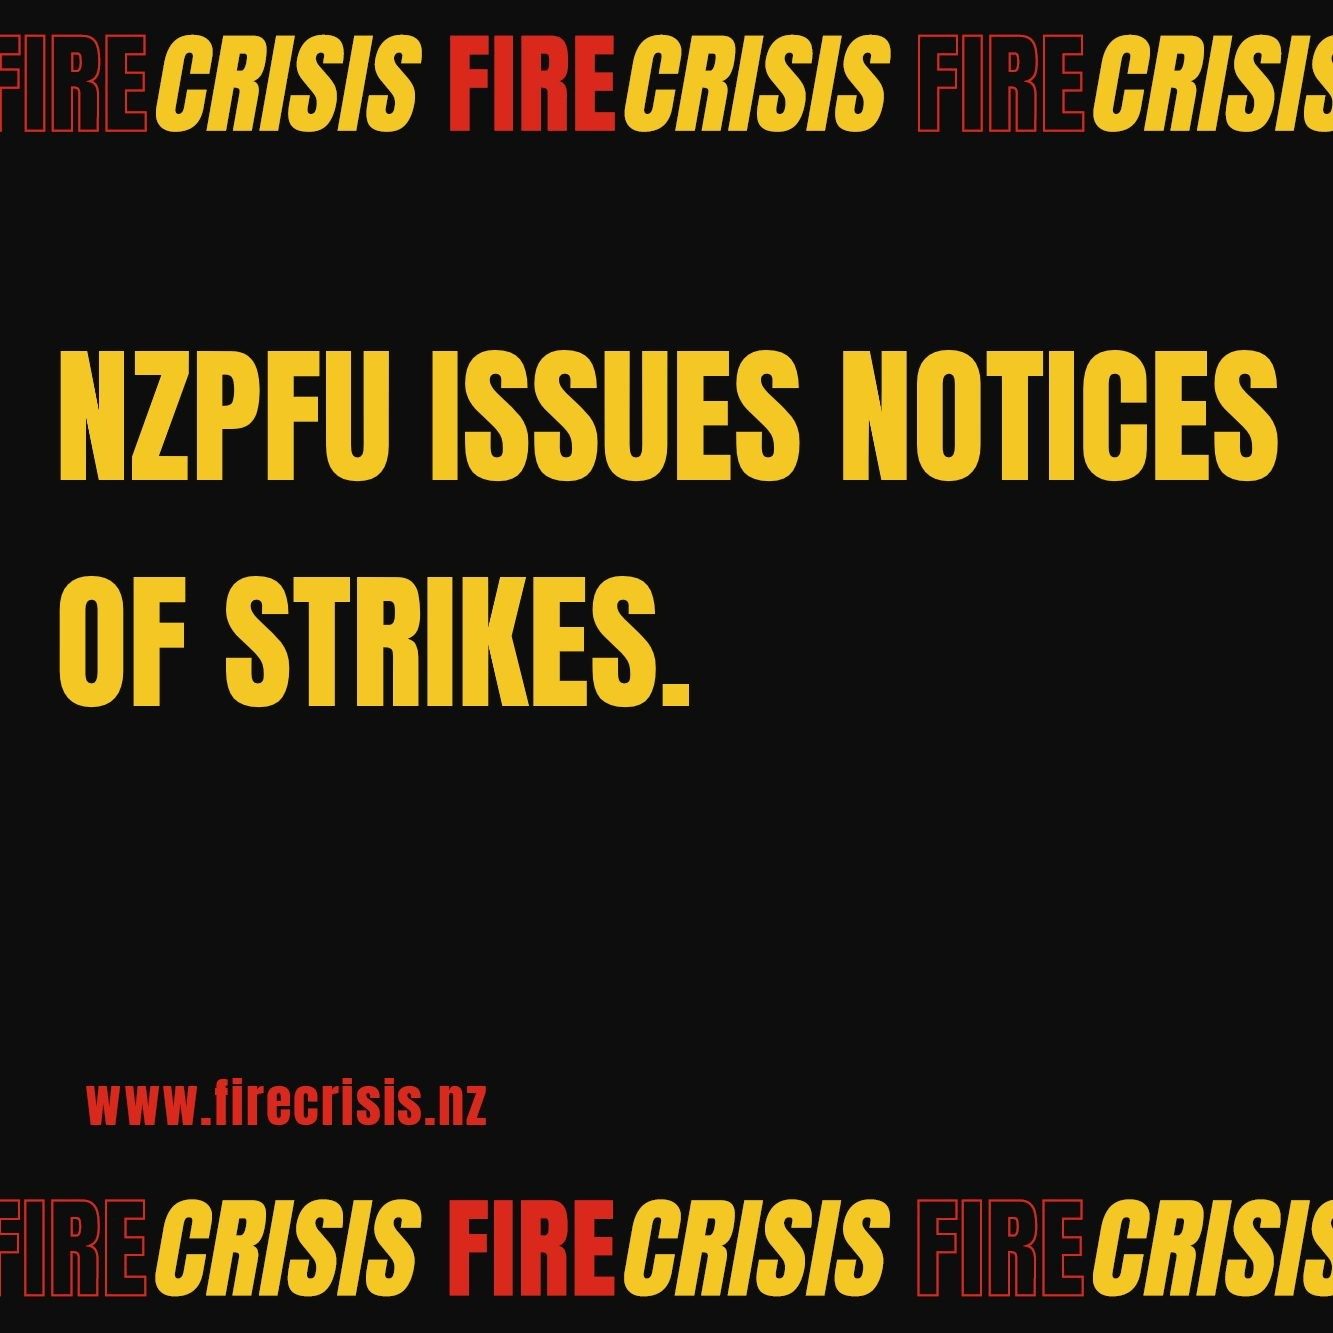 NZPFU ISSUES NOTICES OF STRIKES